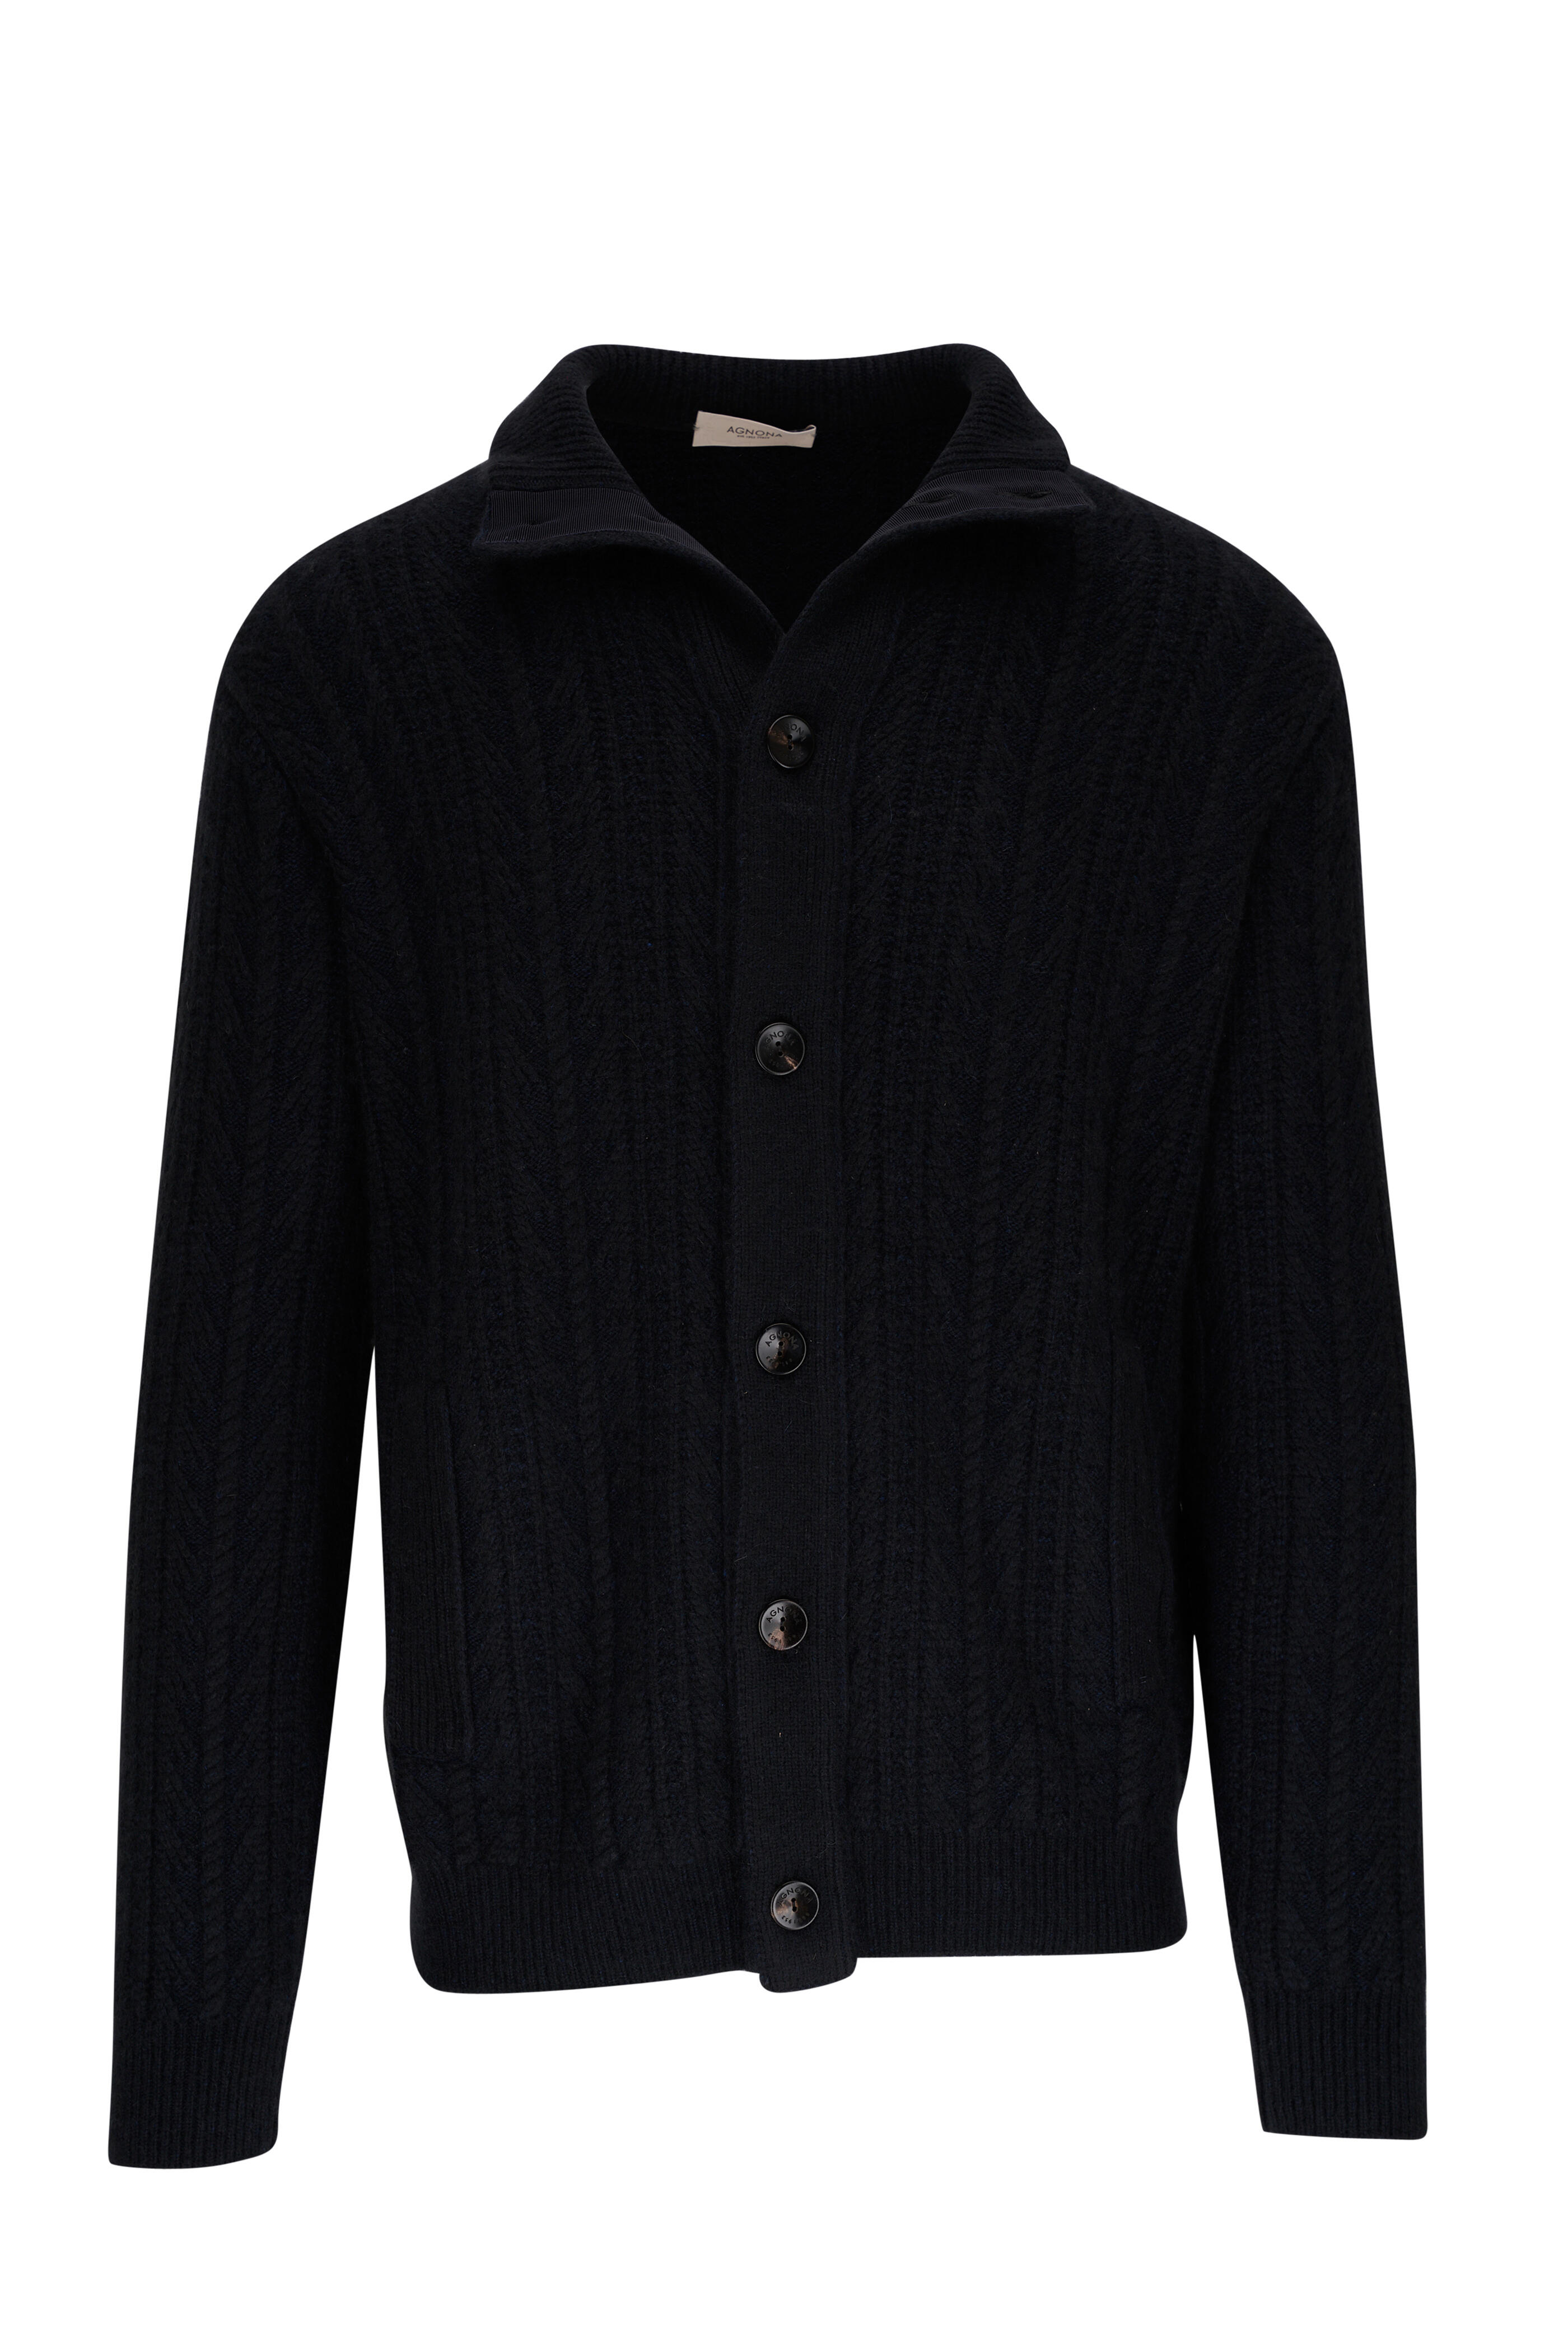 Agnona - Navy Cable Knit Button Cardigan | Mitchell Stores